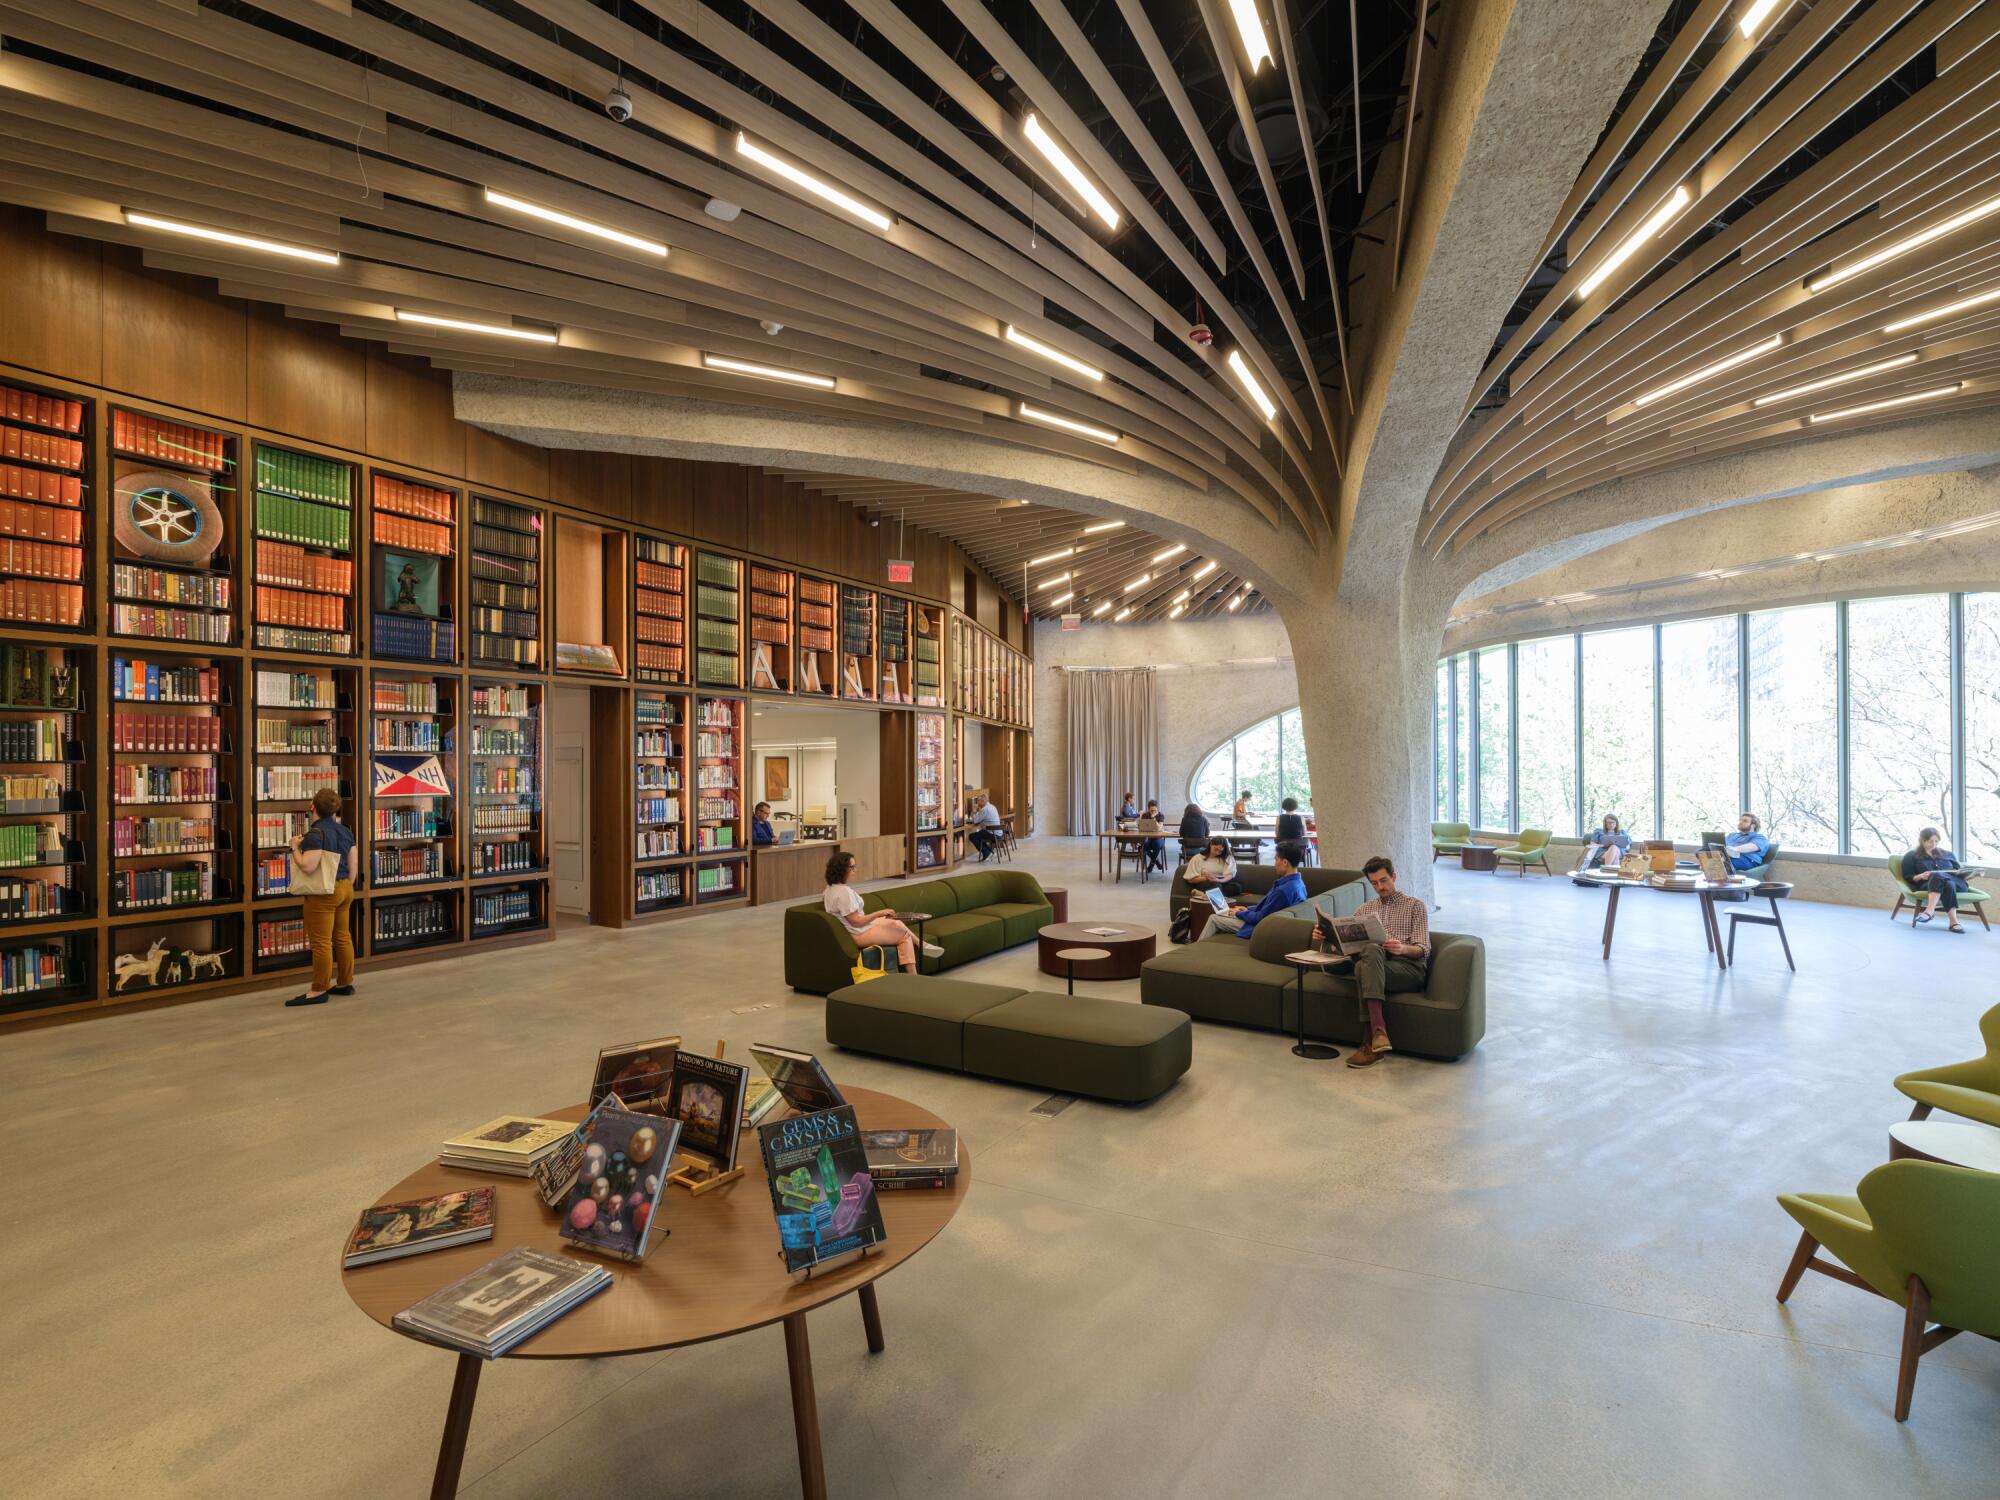 A large library space with tables and reading chairs features a pillar at center in the form of a tree.